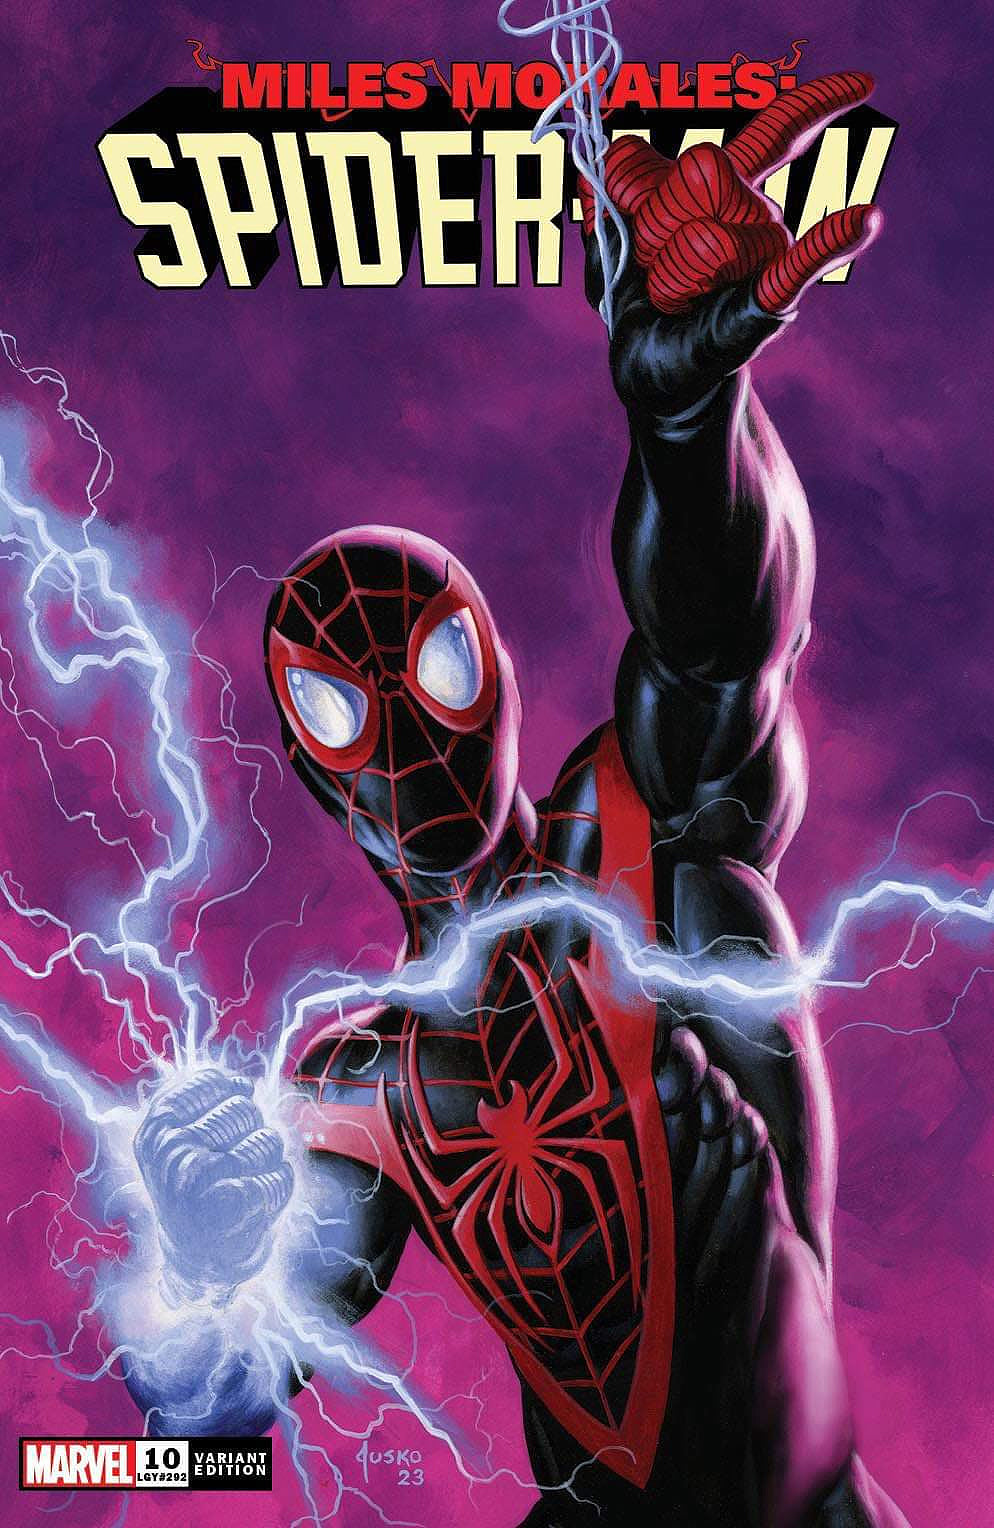 MILES MORALES SPIDER-MAN #10 JOE JUSKO VARIANT LIMITED TO 600 COPIES WITH NUMBERED COA